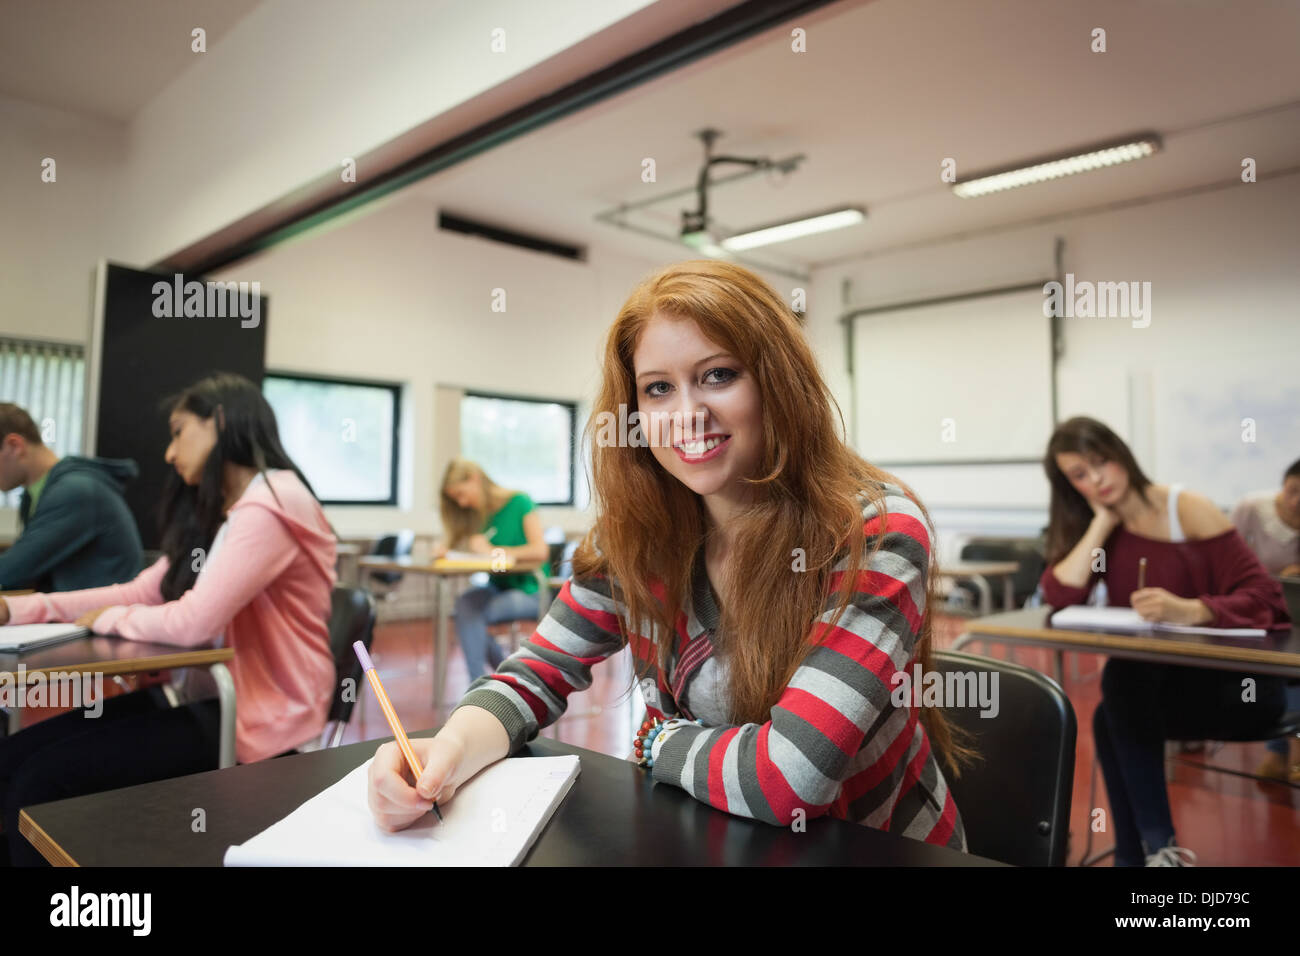 Smiling female student looking at camera in class Stock Photo